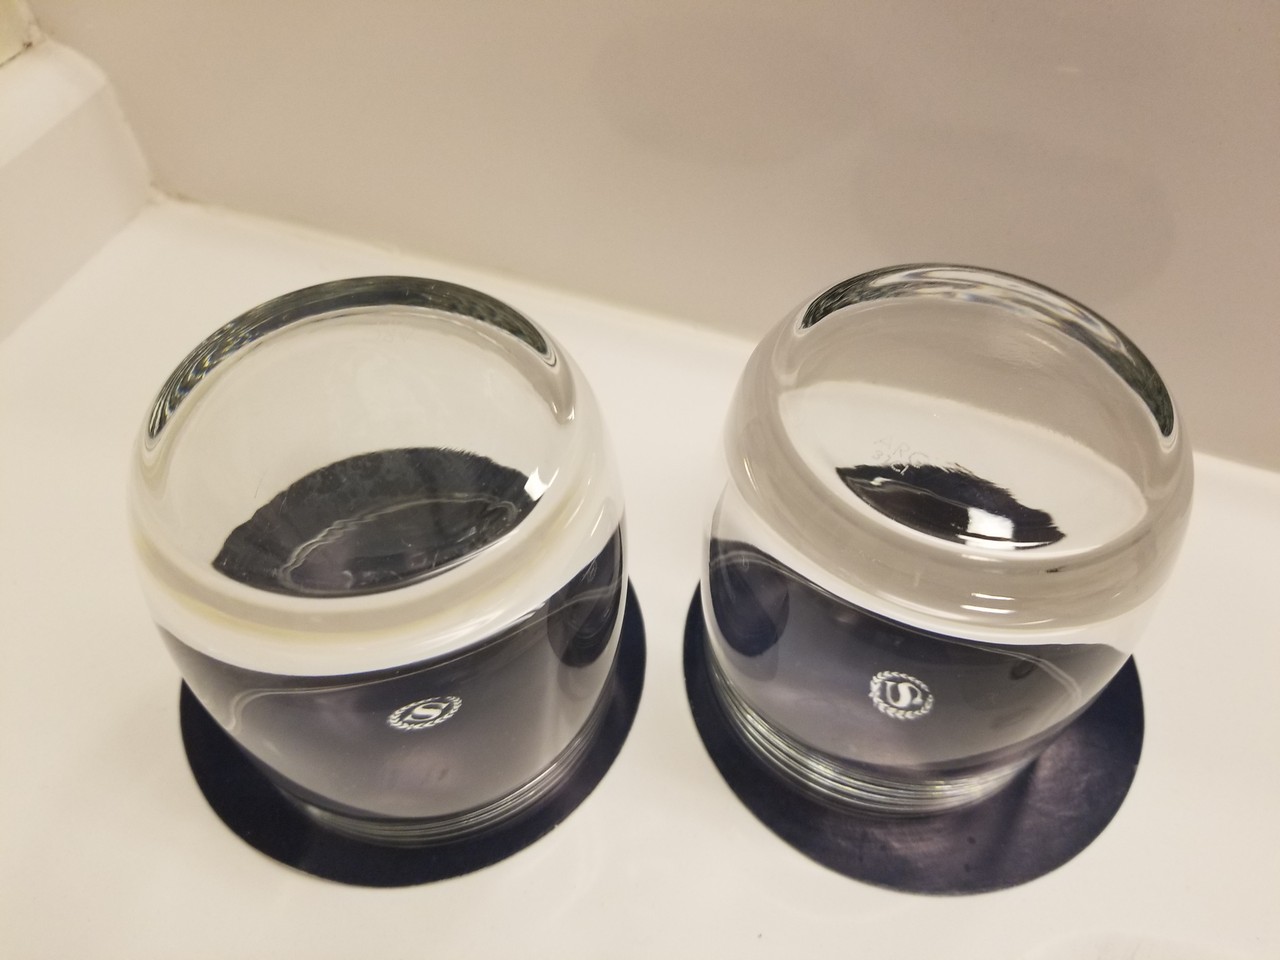 two glass jars on a counter